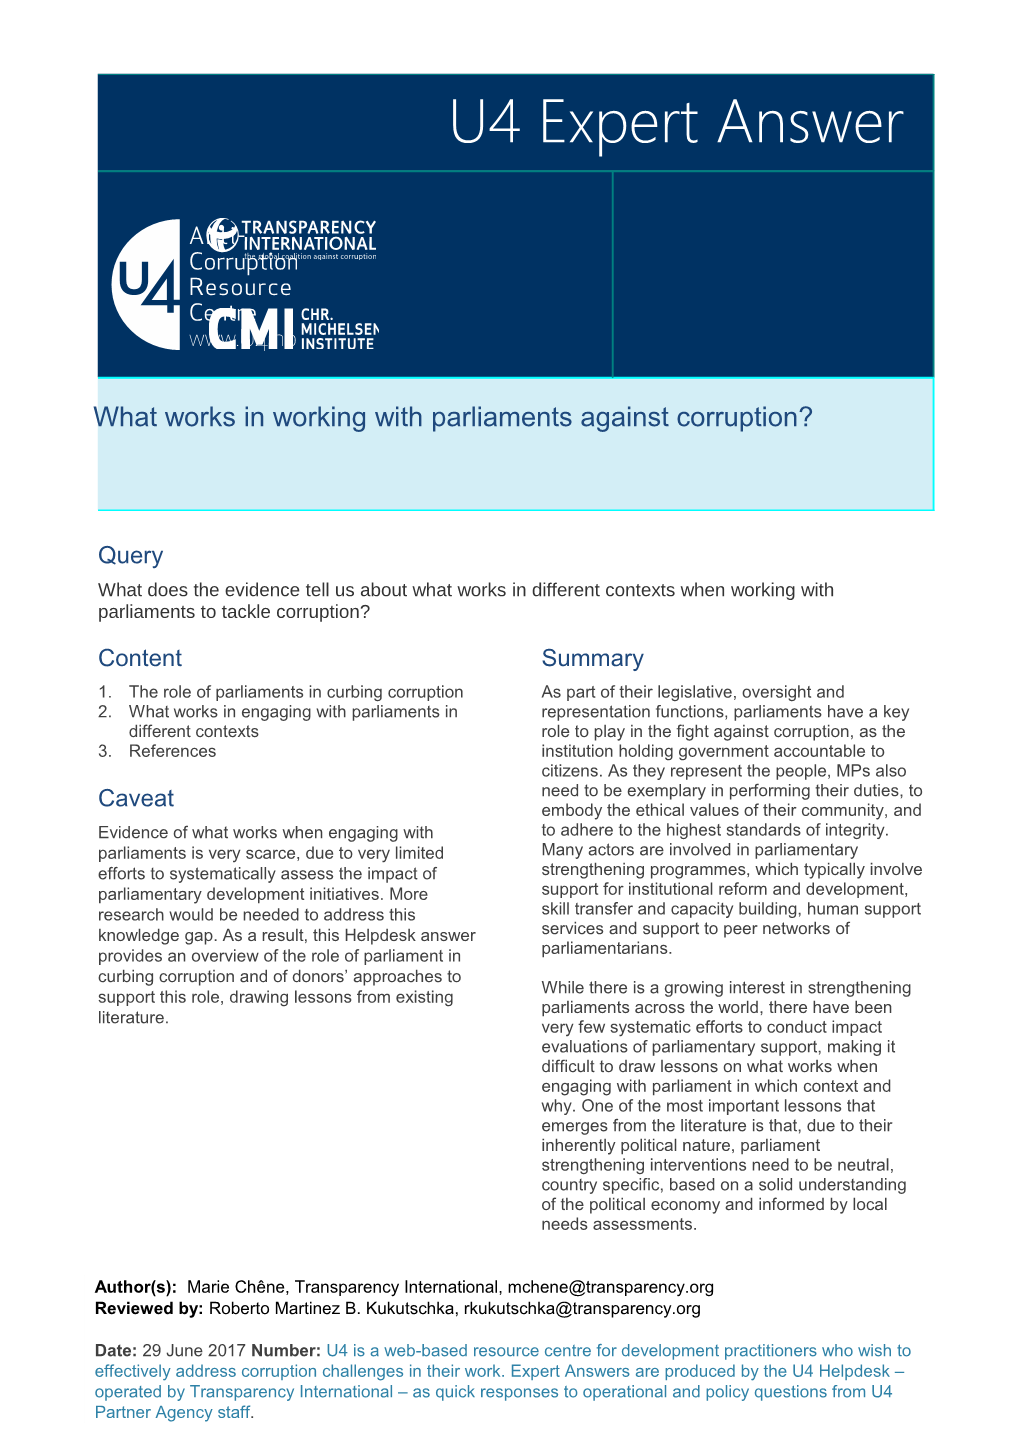 What Does the Evidence Tell Us About What Works in Different Contexts When Working With